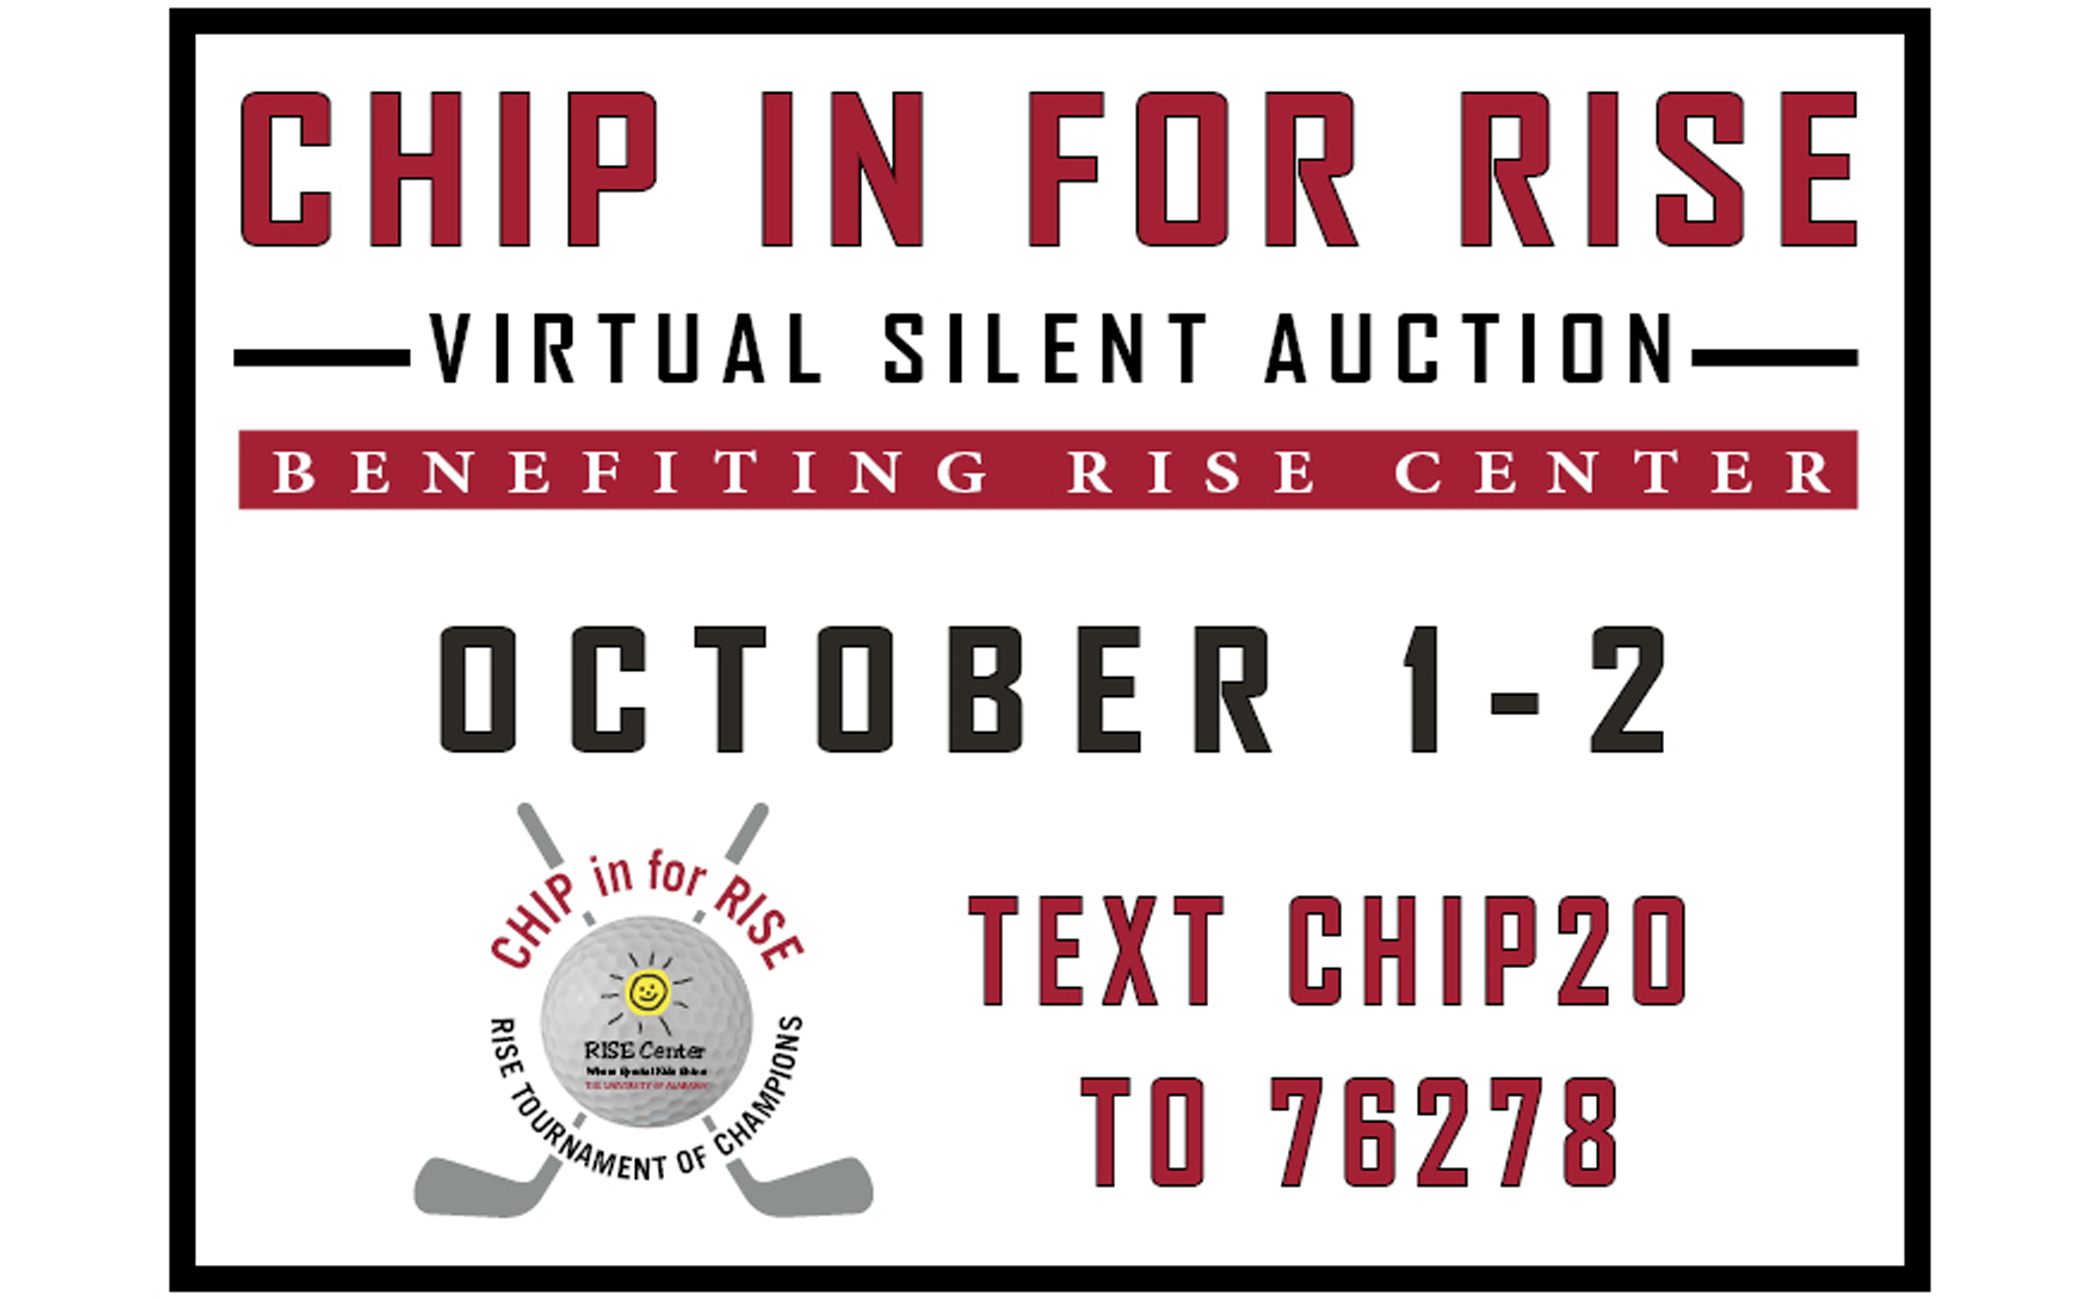 CHIP in for RISE logo